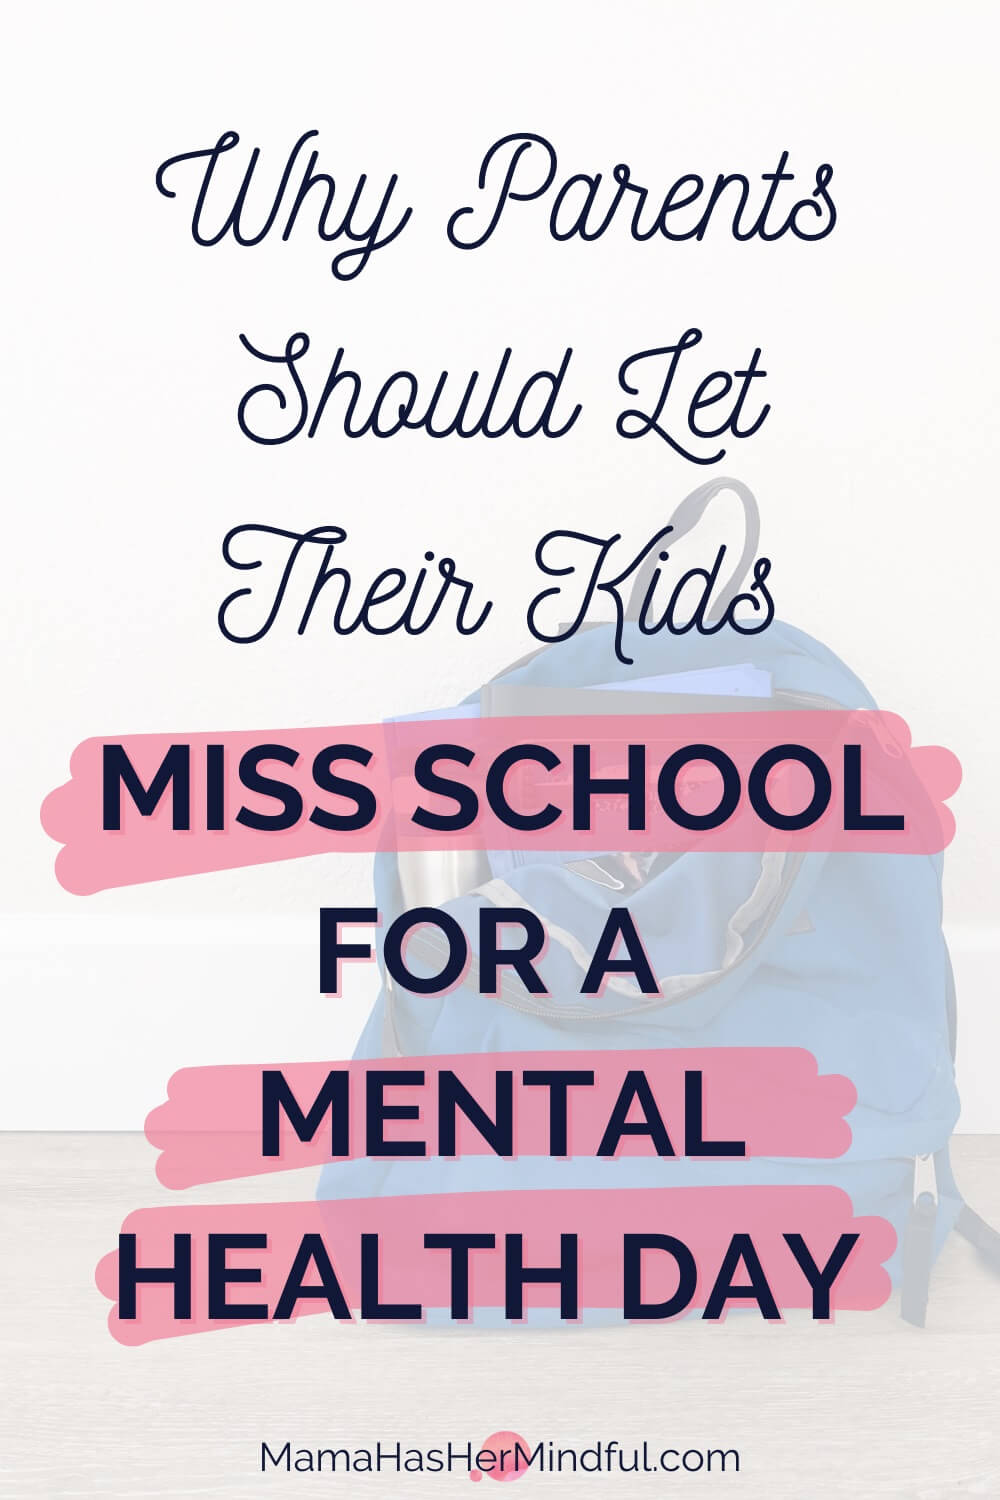 Why Parents Are Letting Their Kids Miss School for a Mental Health Day